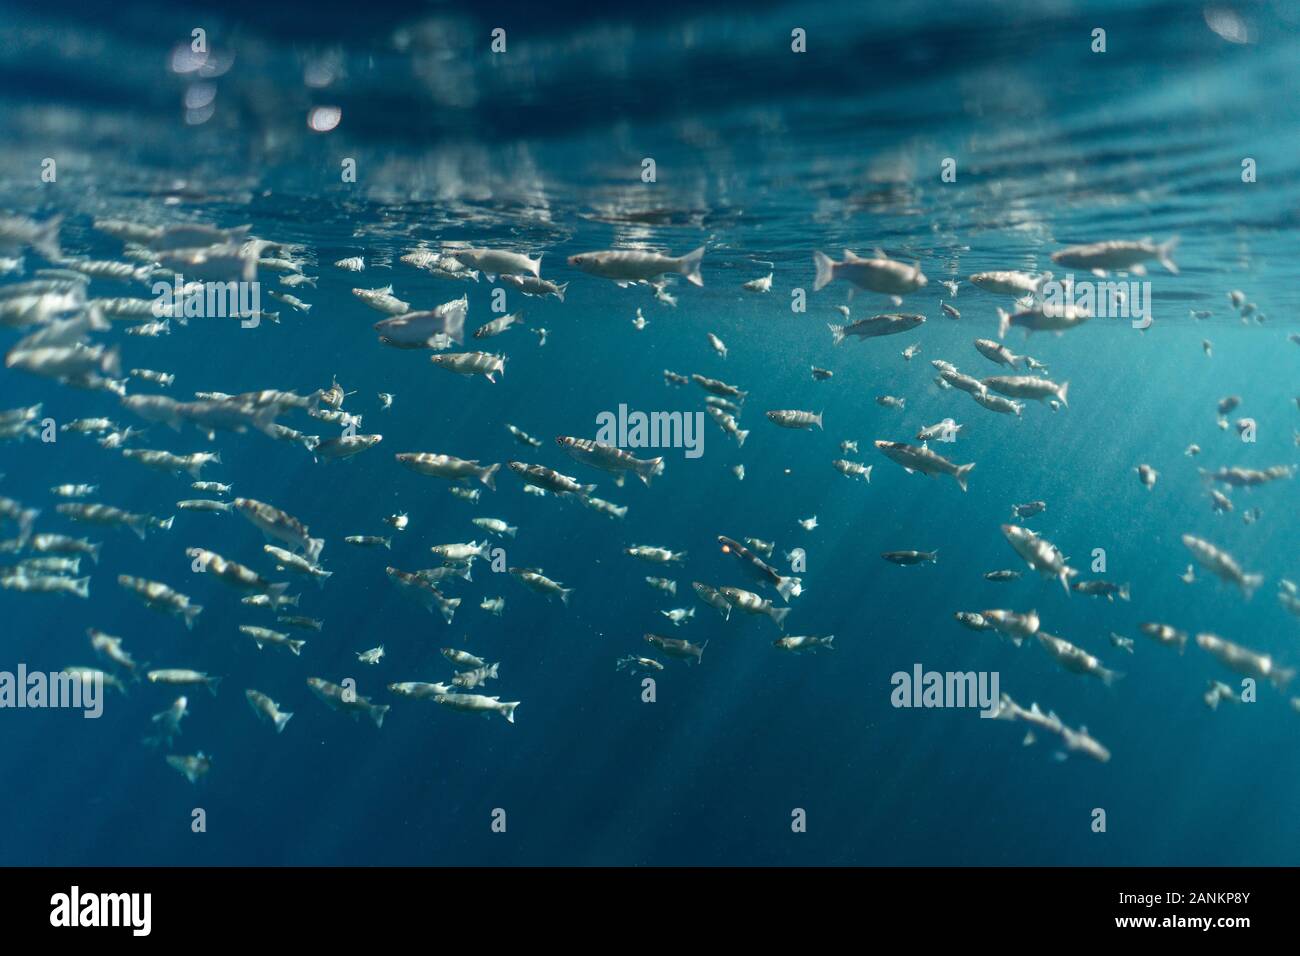 Mugil cephalus fish under the surface of the egypt ocean, small fish swarm in the ocean of egypt, underwater photography Stock Photo